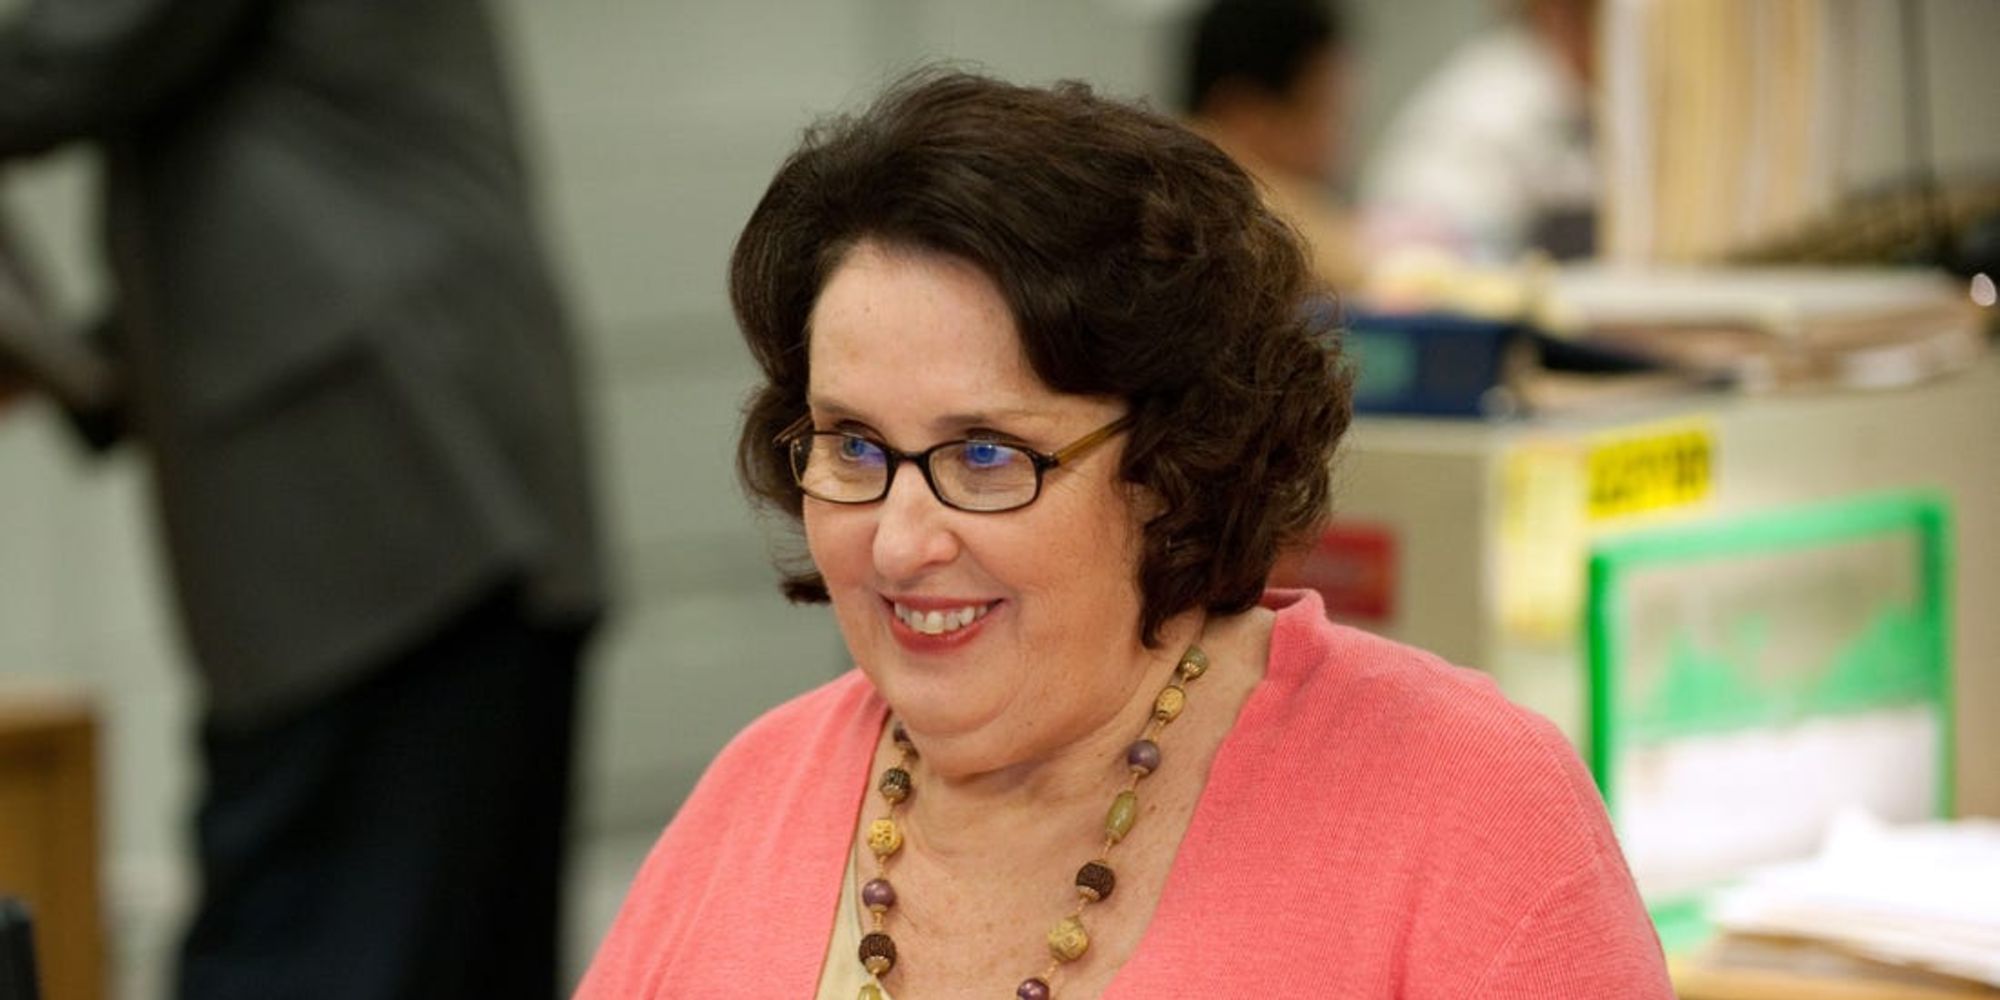 Phyllis Vance smiling while sitting at her desk at The Office